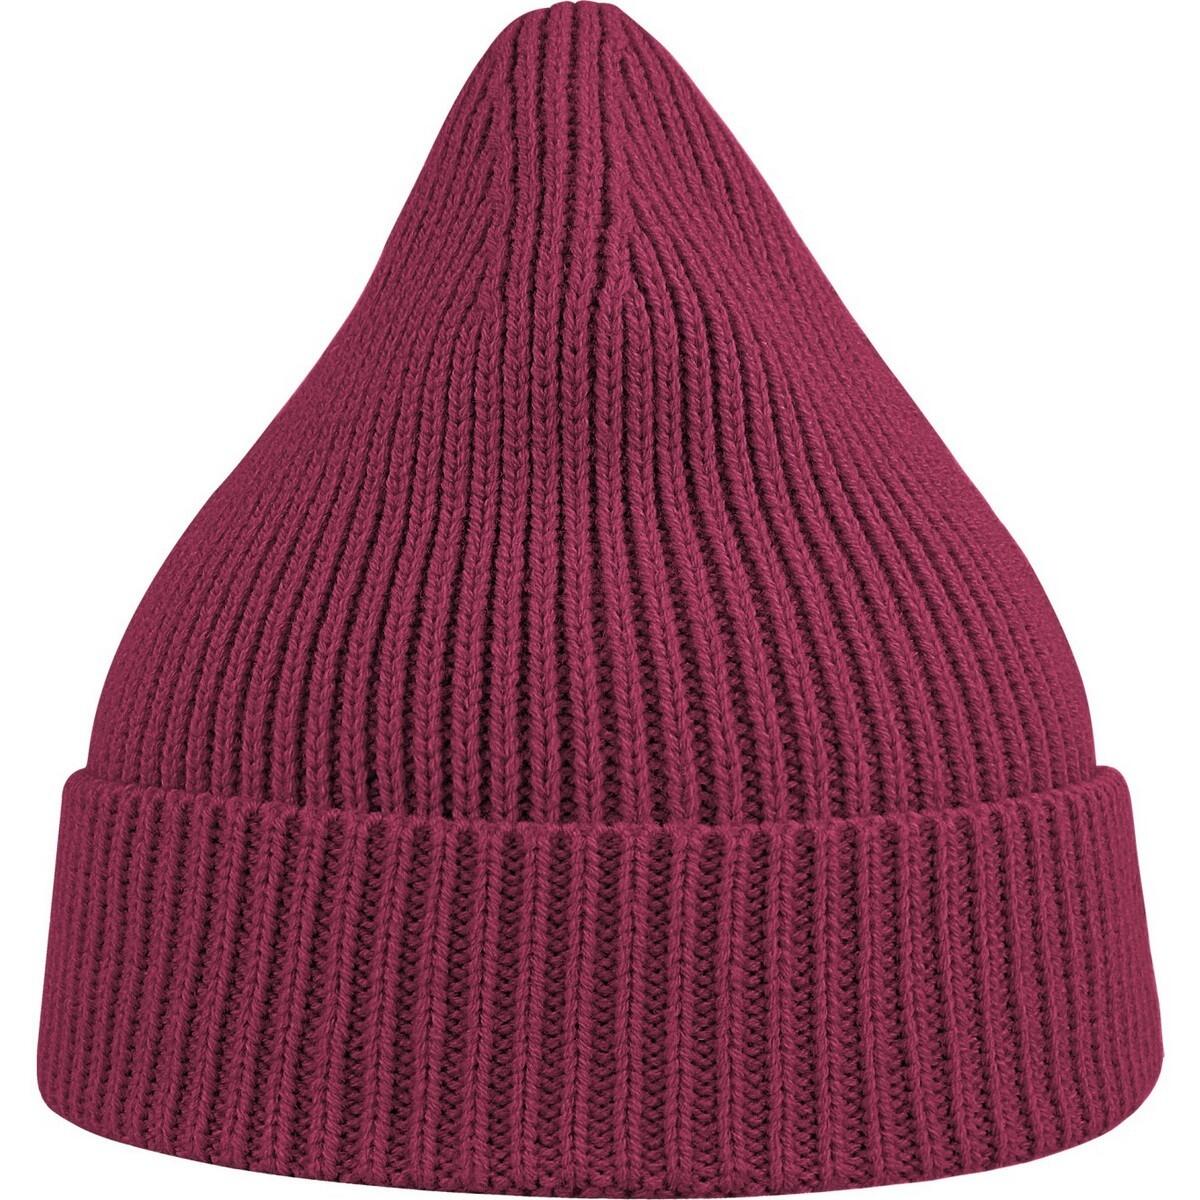 Unisex Adult Andy Recycled Polyester Beanie (Burgundy) 2/3